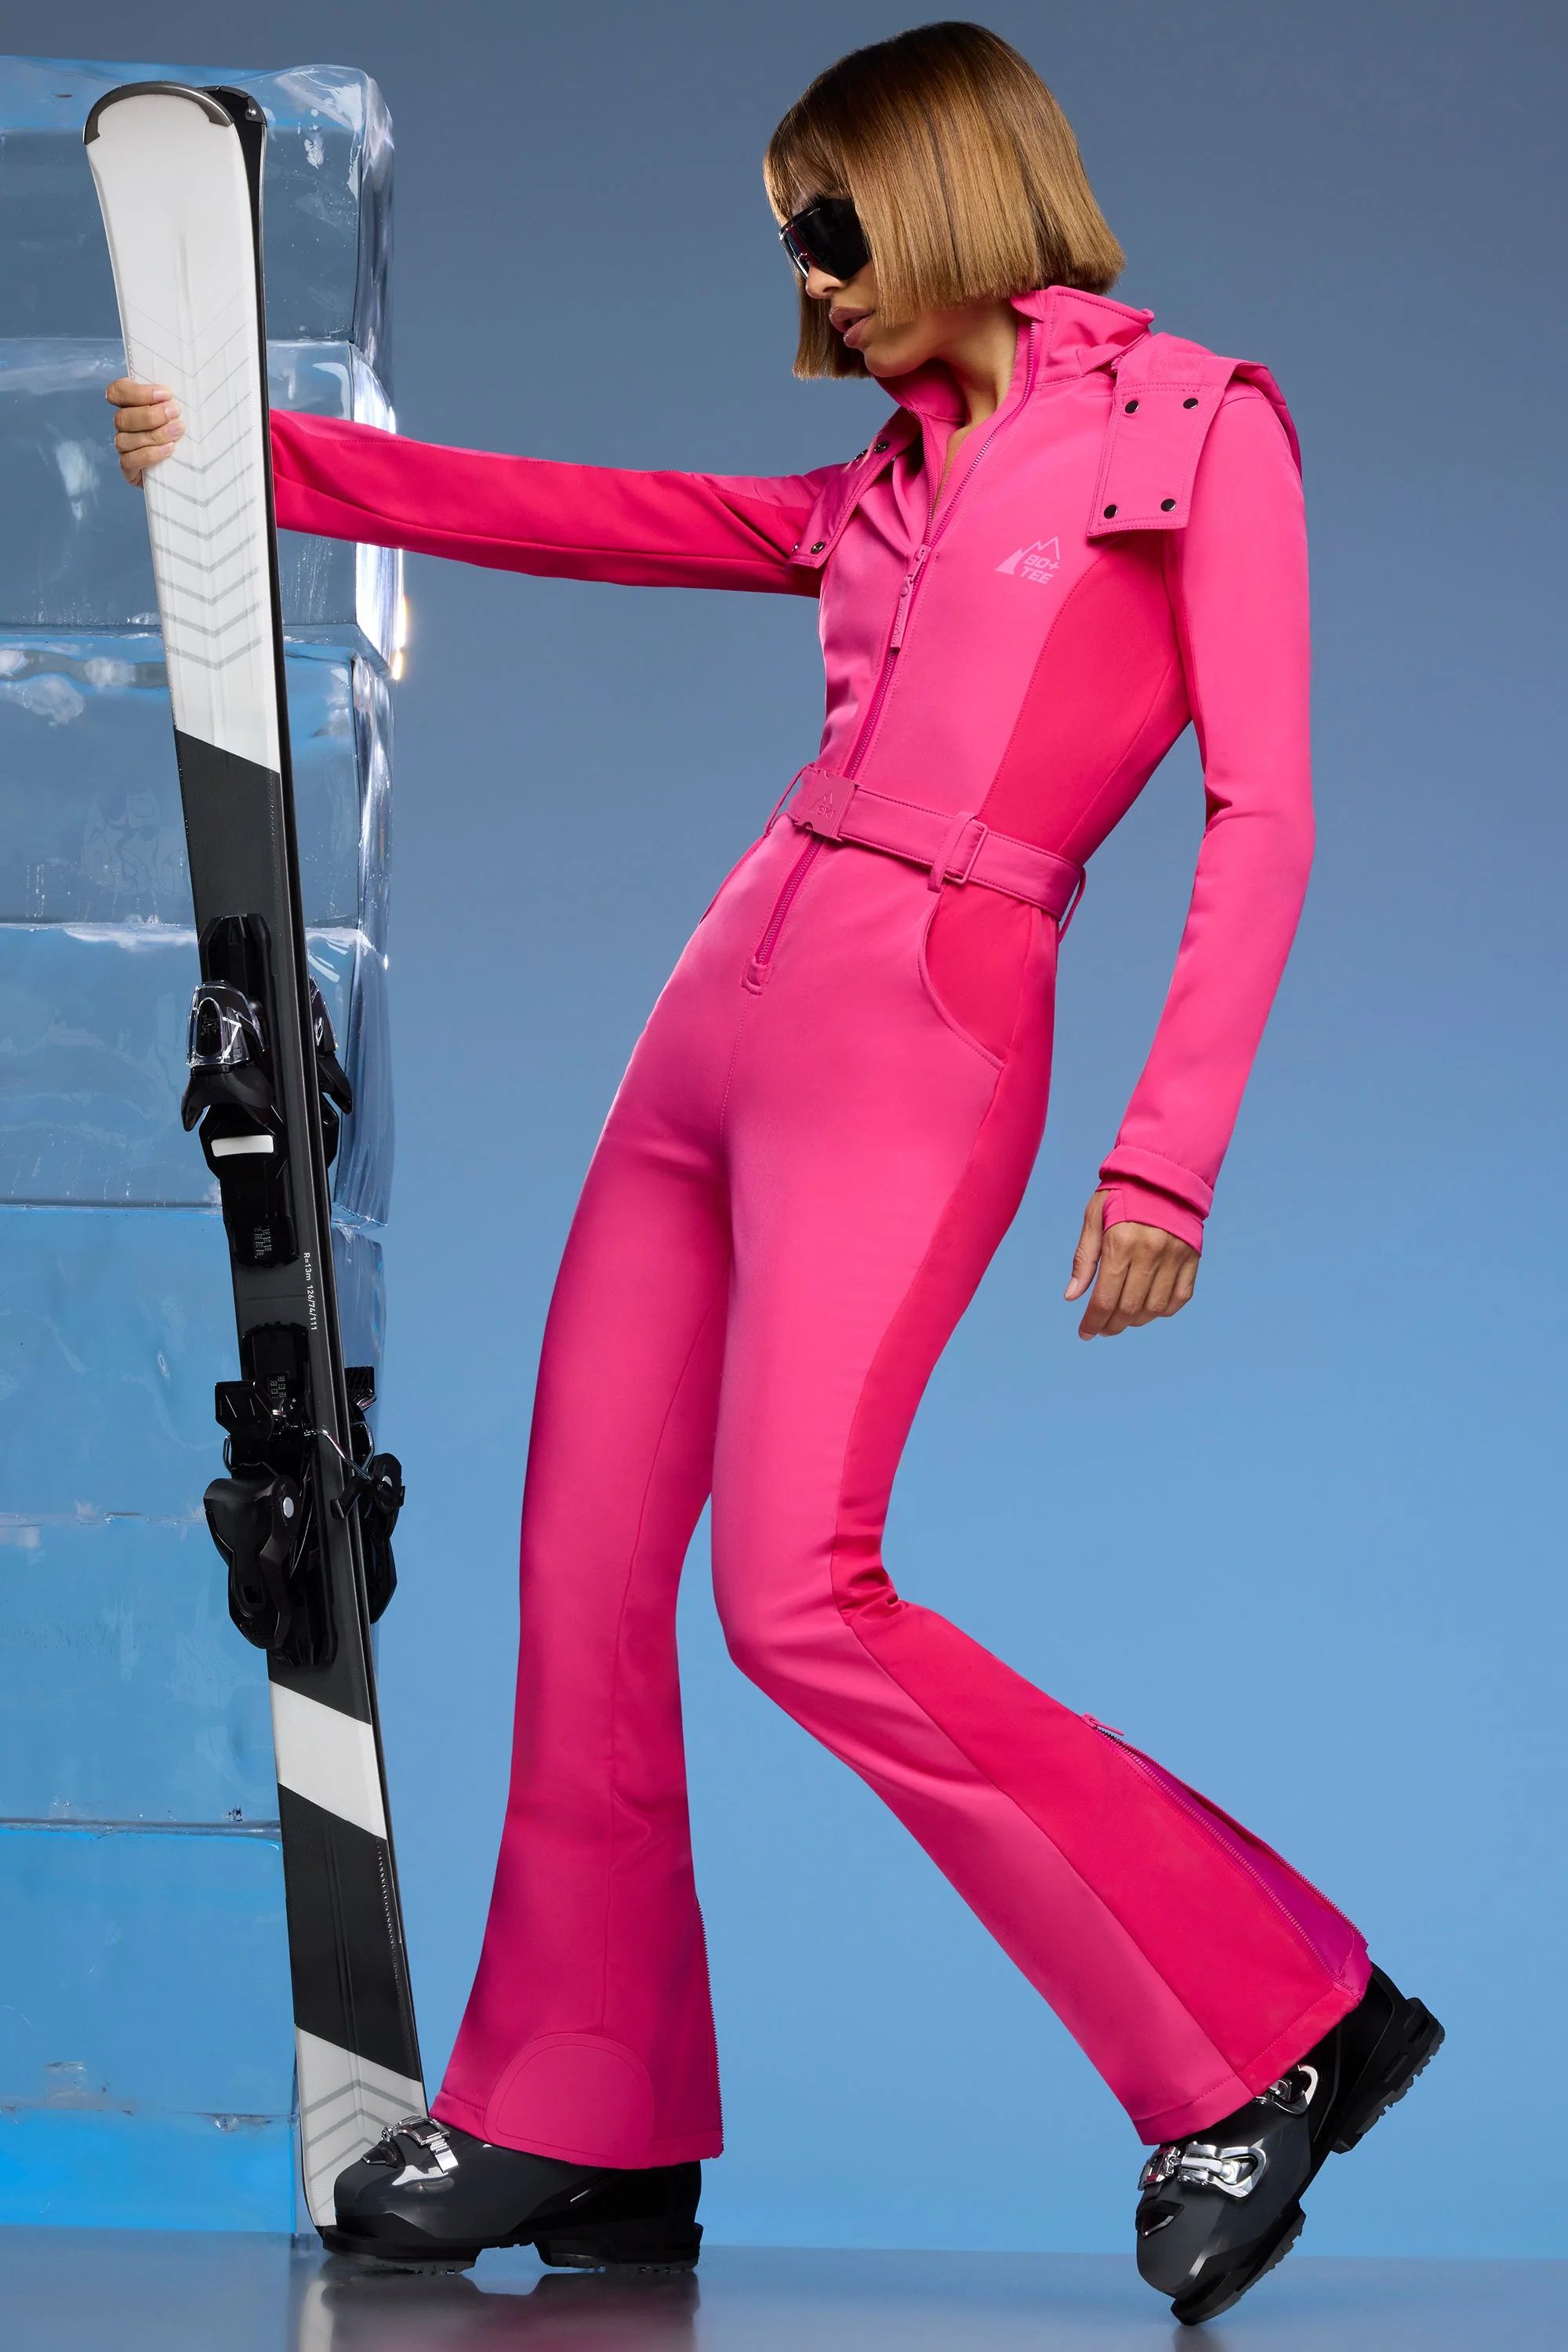 Fleece Lined Ski Suit in Fuchsia Pink | Oh Polly